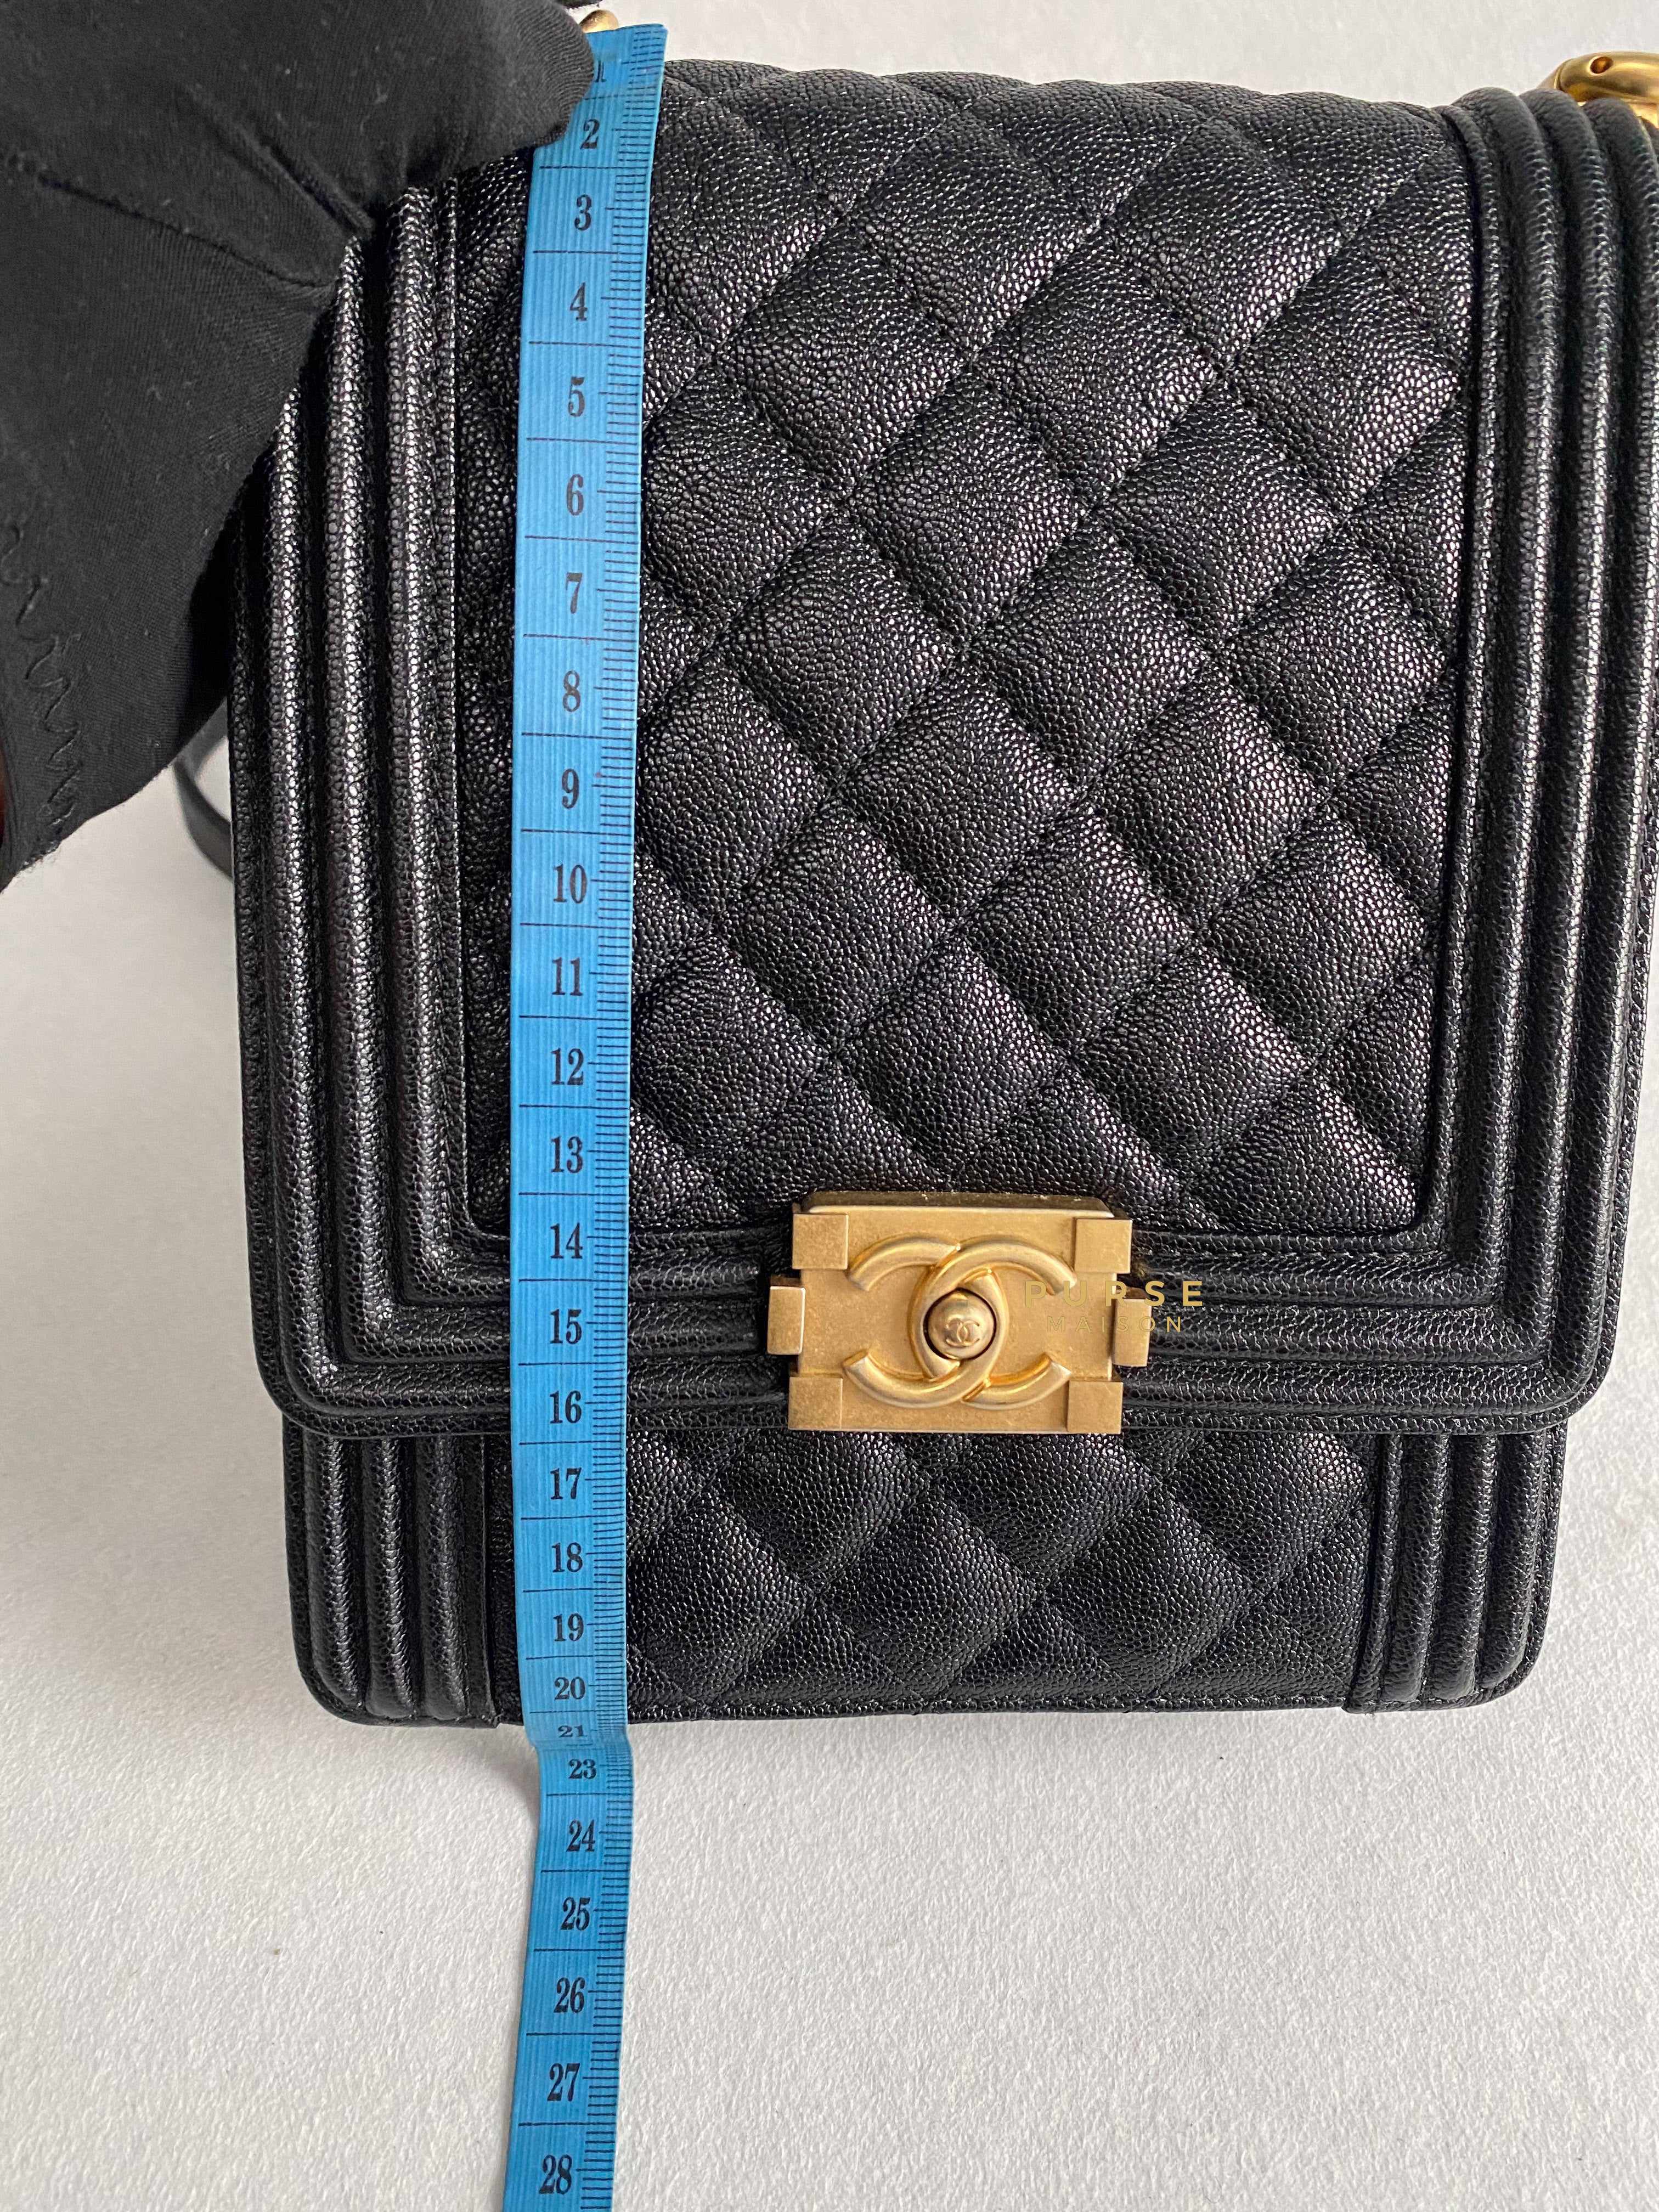 Chanel Cruise Boy North South in Black Caviar Leather and Aged Gold Hardware Series 26 | Purse Maison Luxury Bags Shop